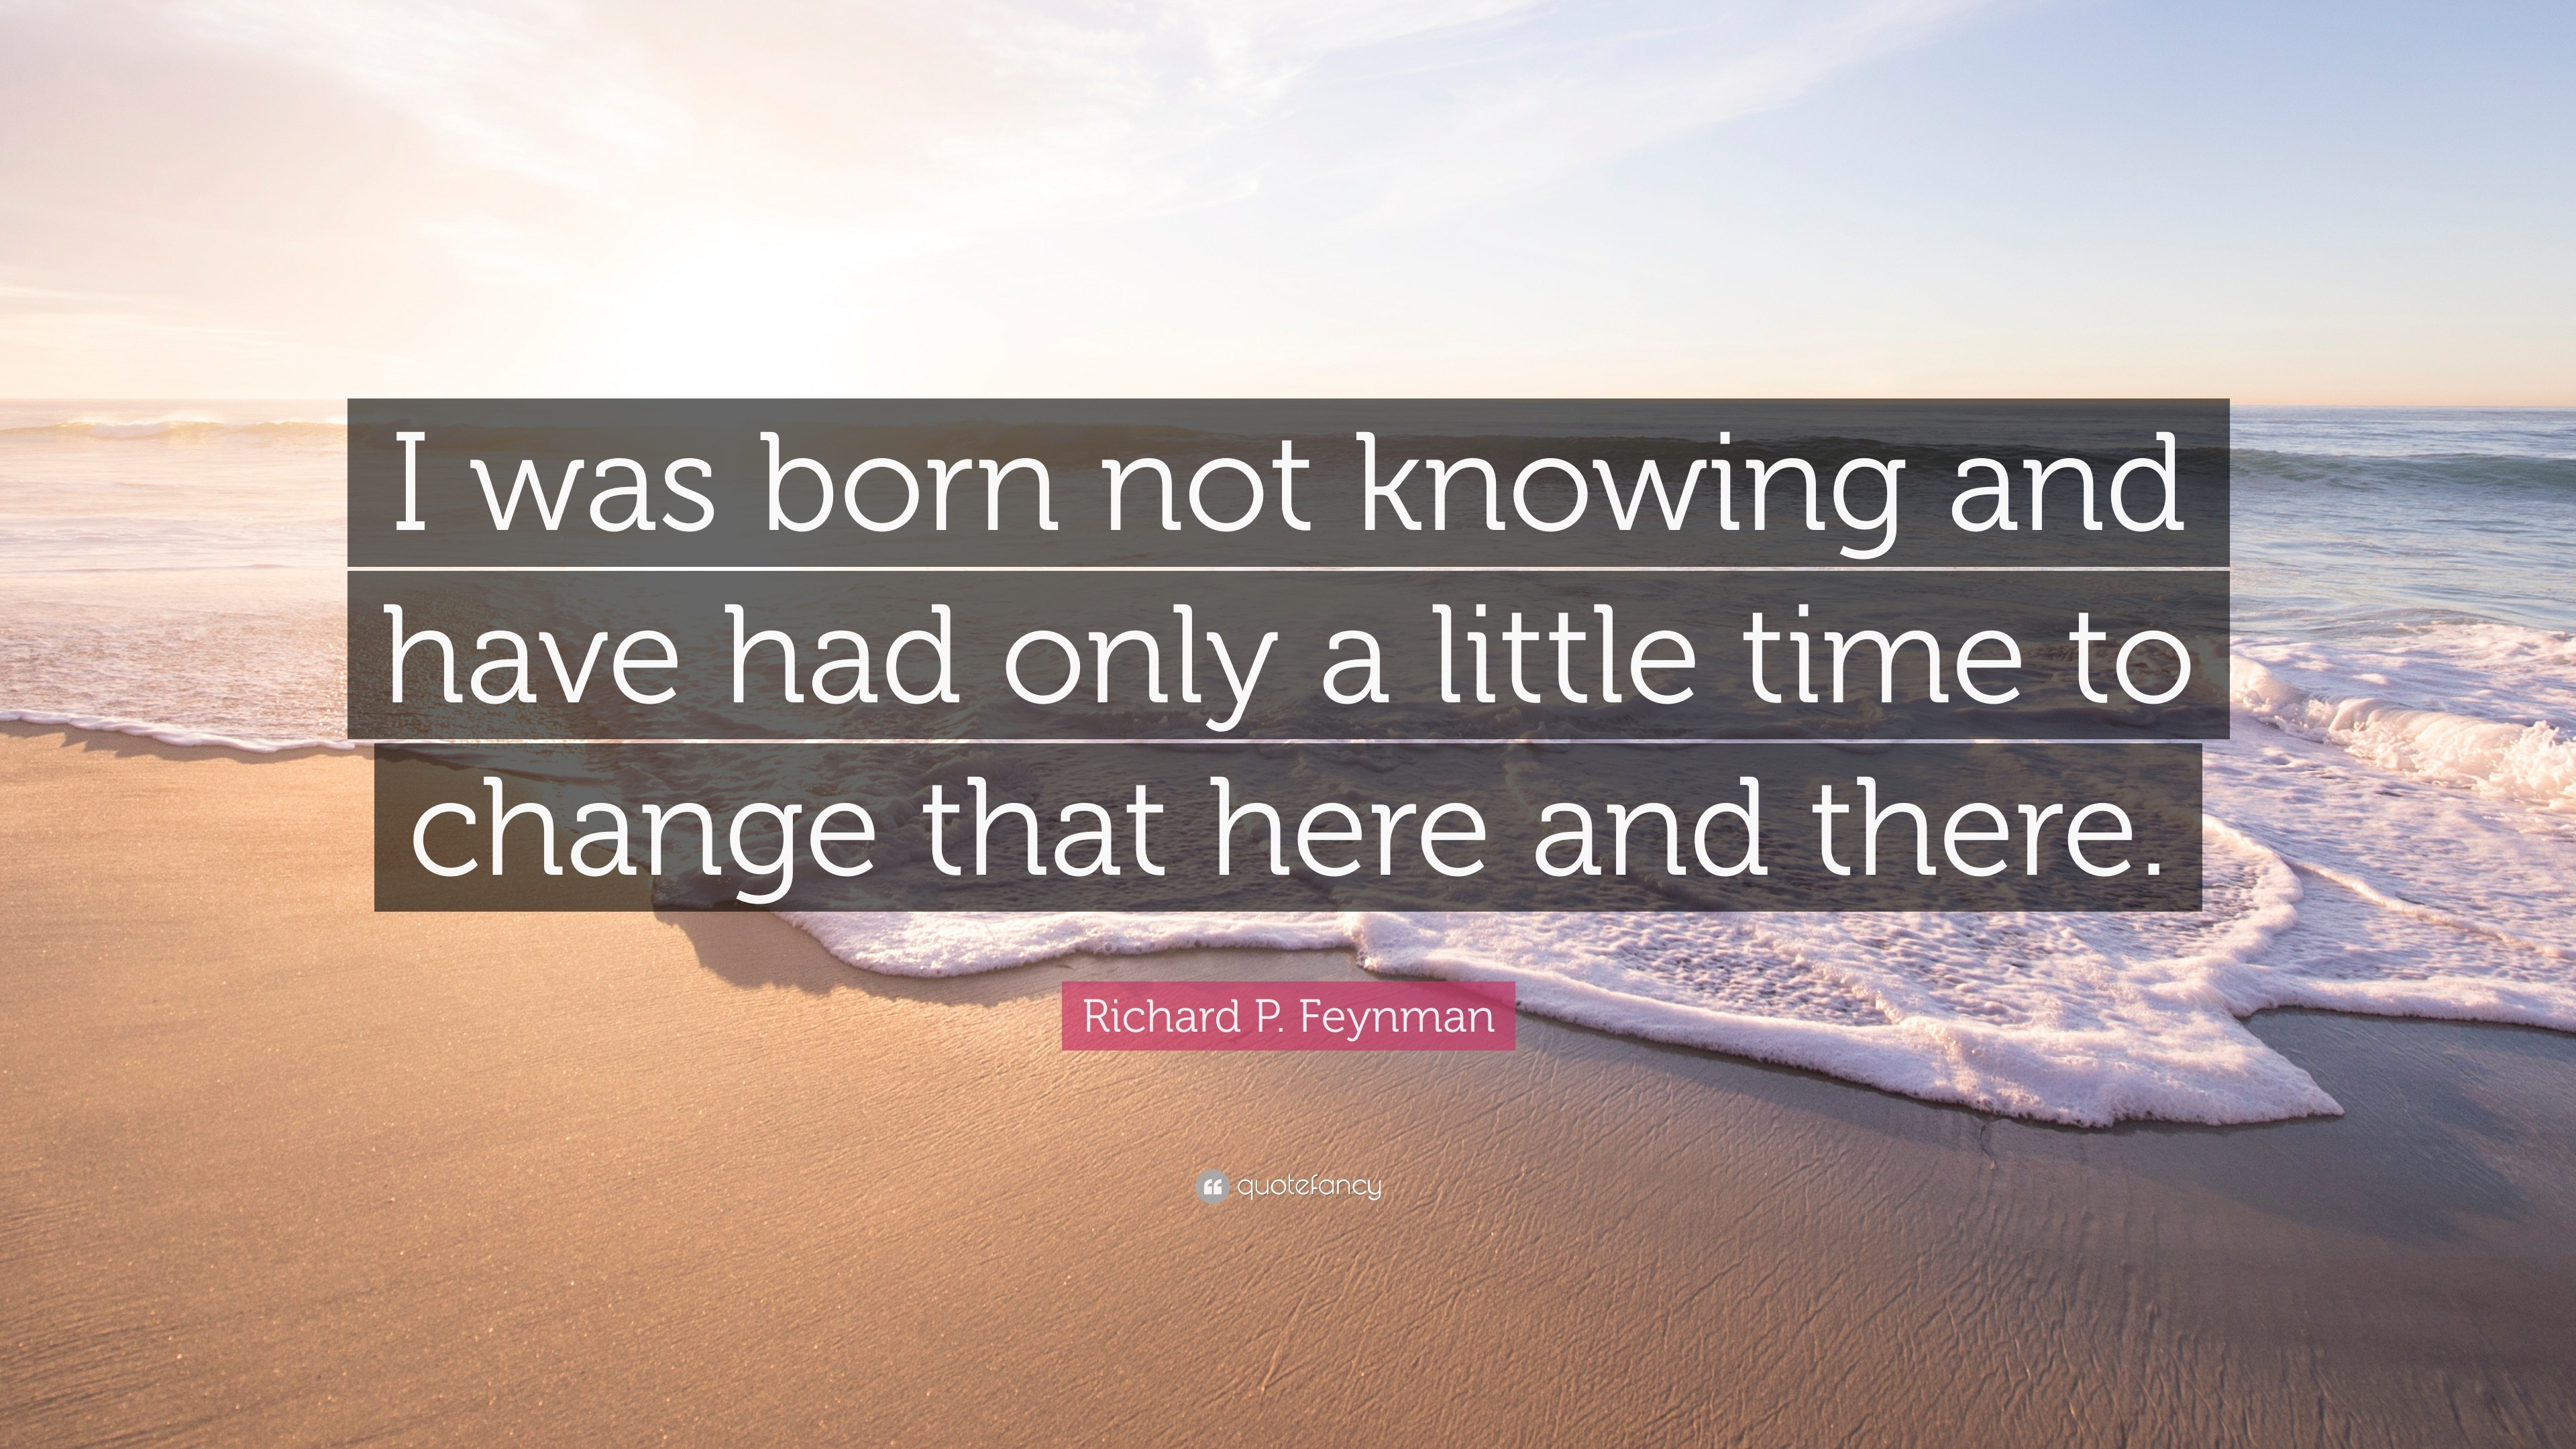 Richard P. Feynman Quote: “I was born not knowing and have had ...